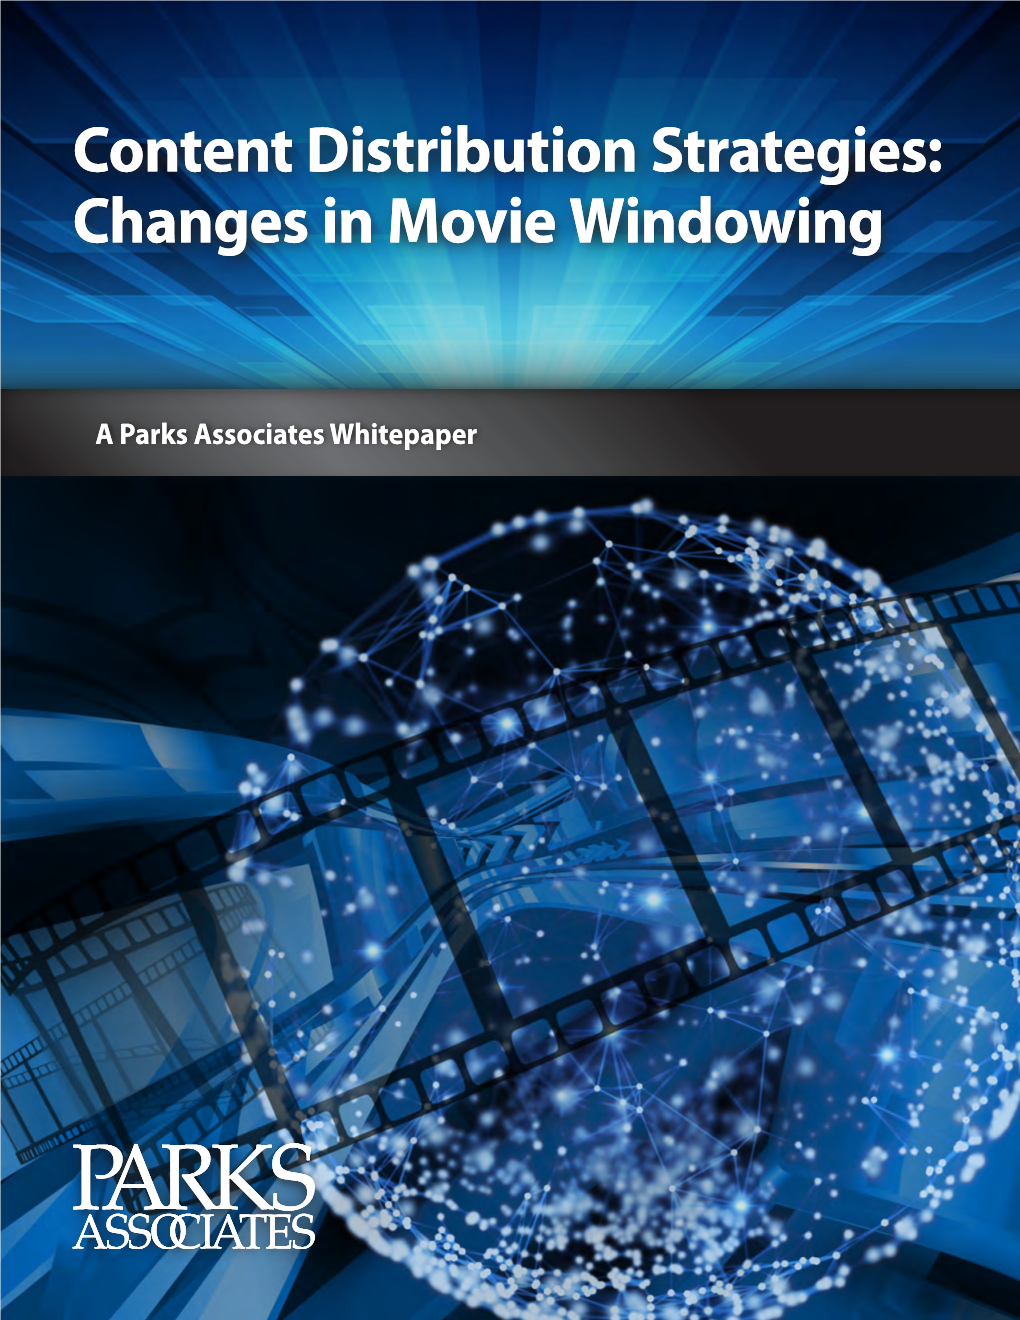 Content Distribution Strategies: Changes in Movie Windowing